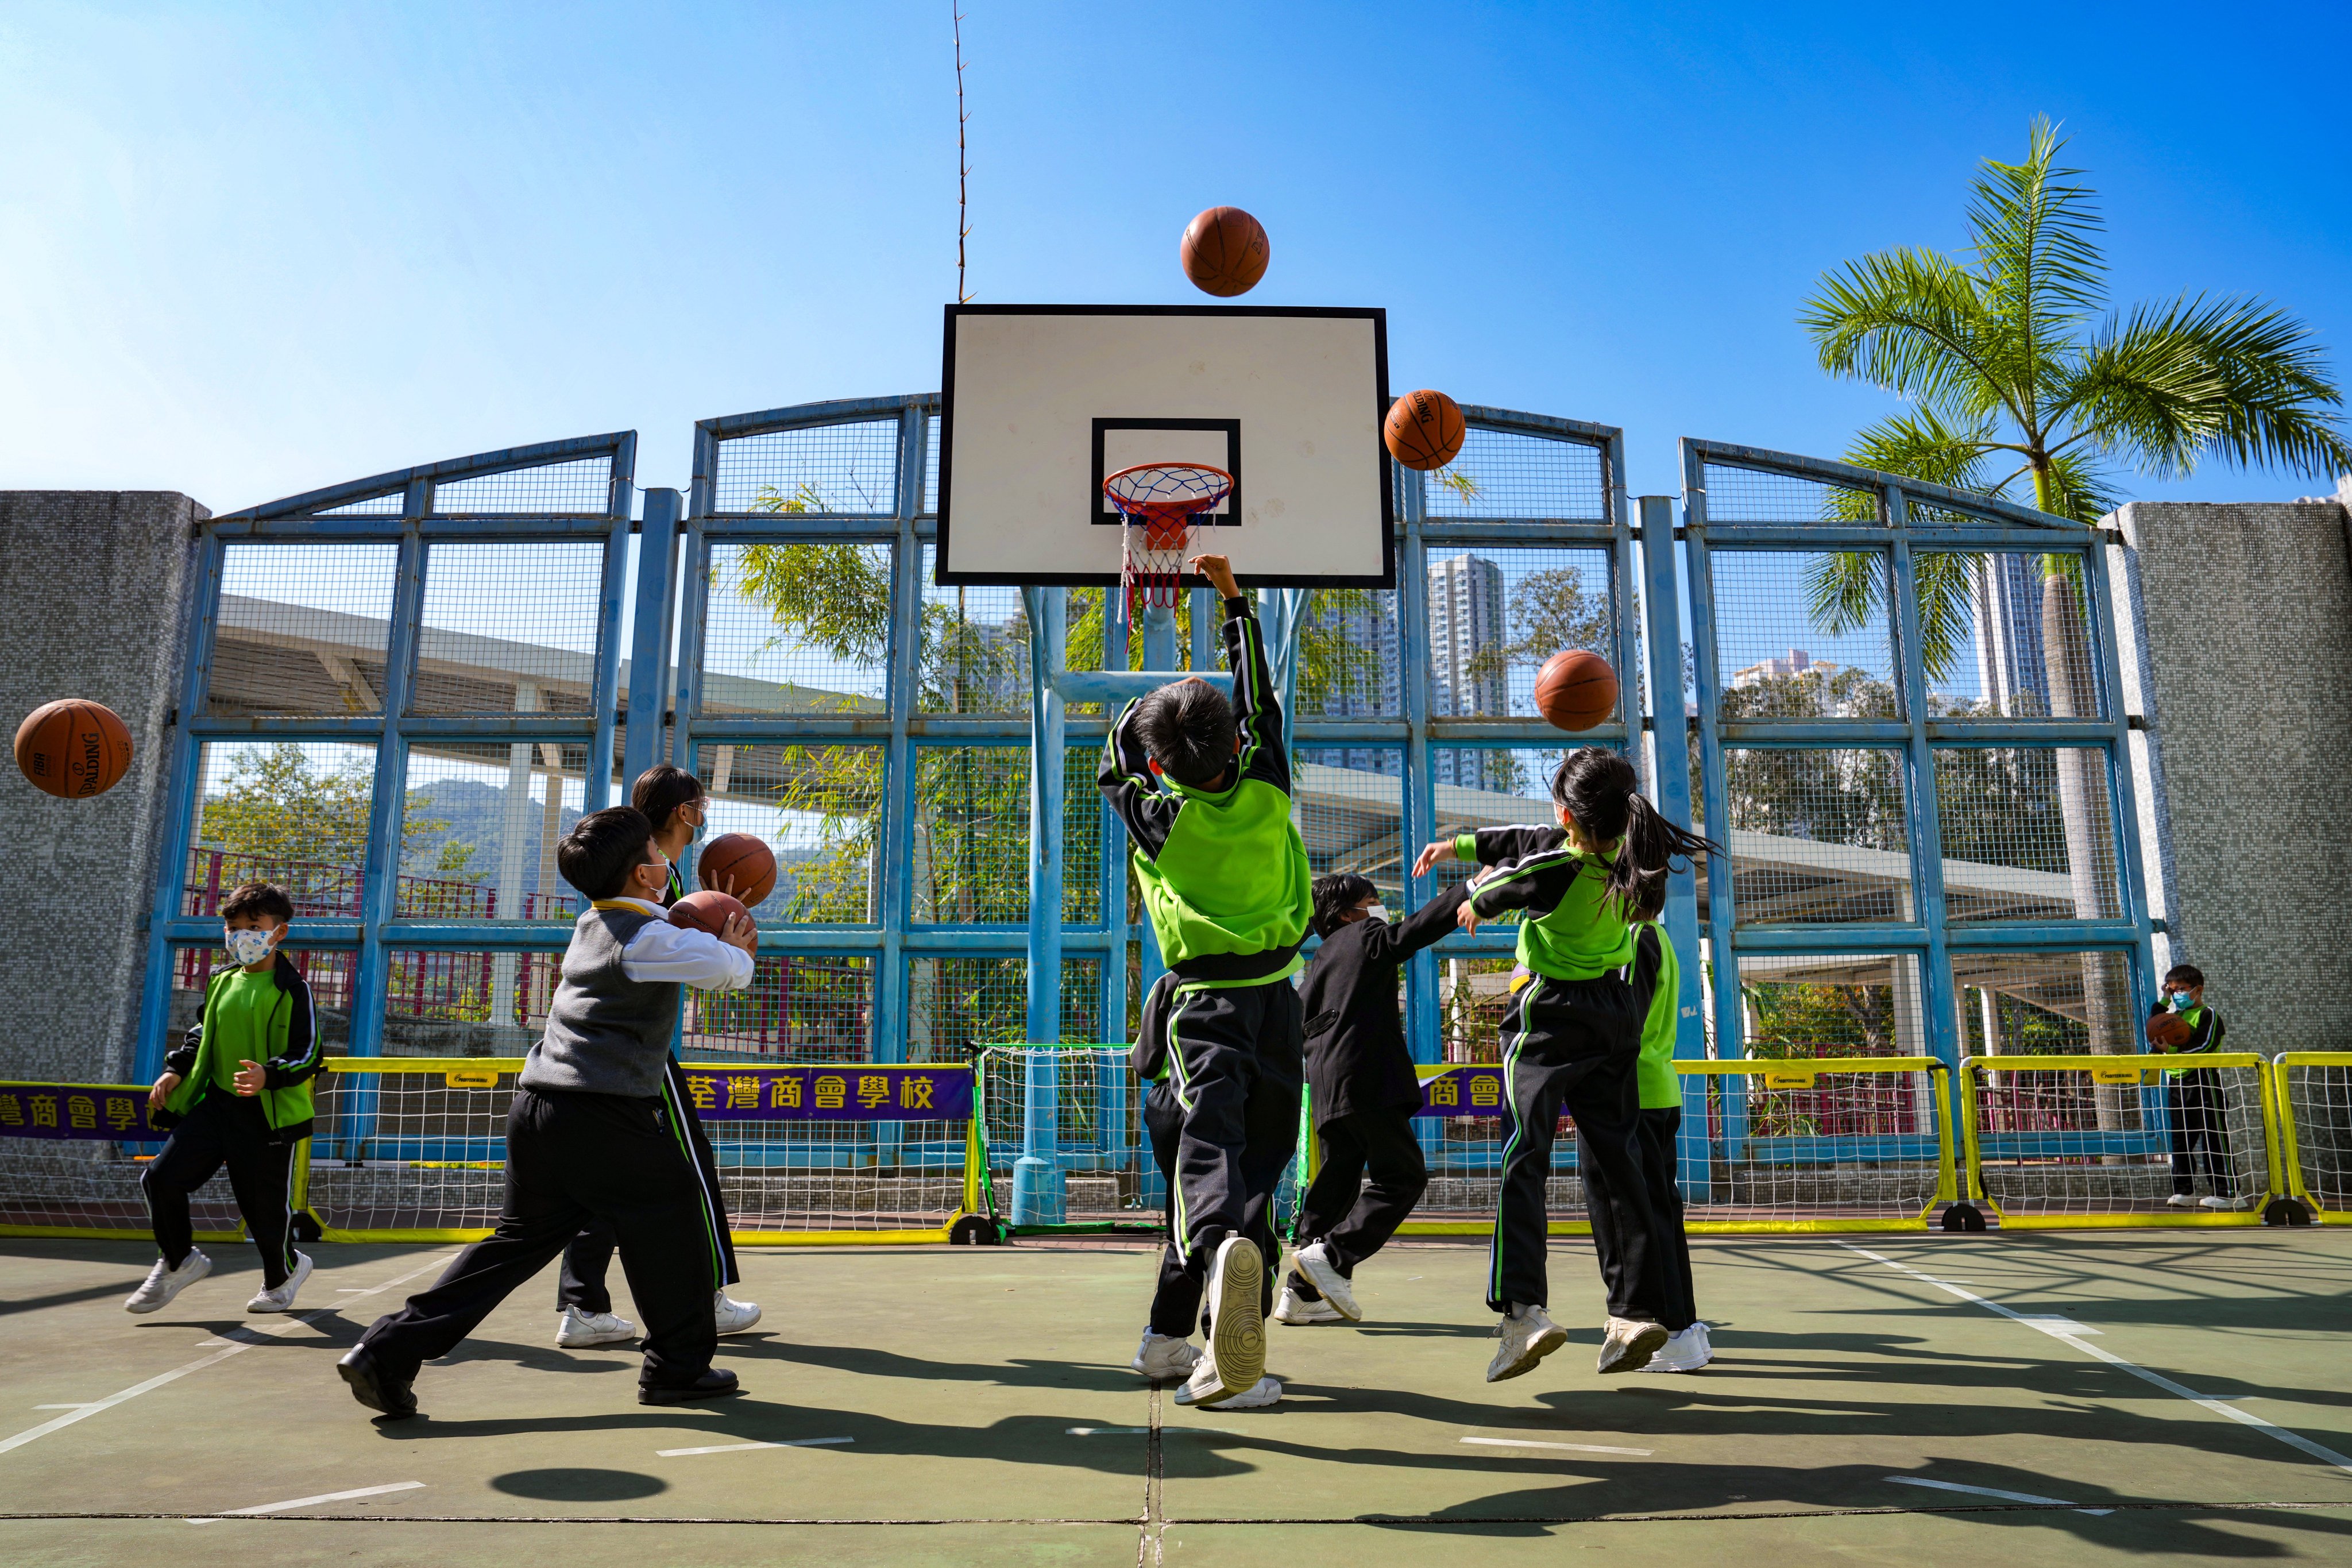 Primary school pupils’ performance in PE may become part of their secondary school allocation assessments under a new grading rubric. Photo: Elson Li